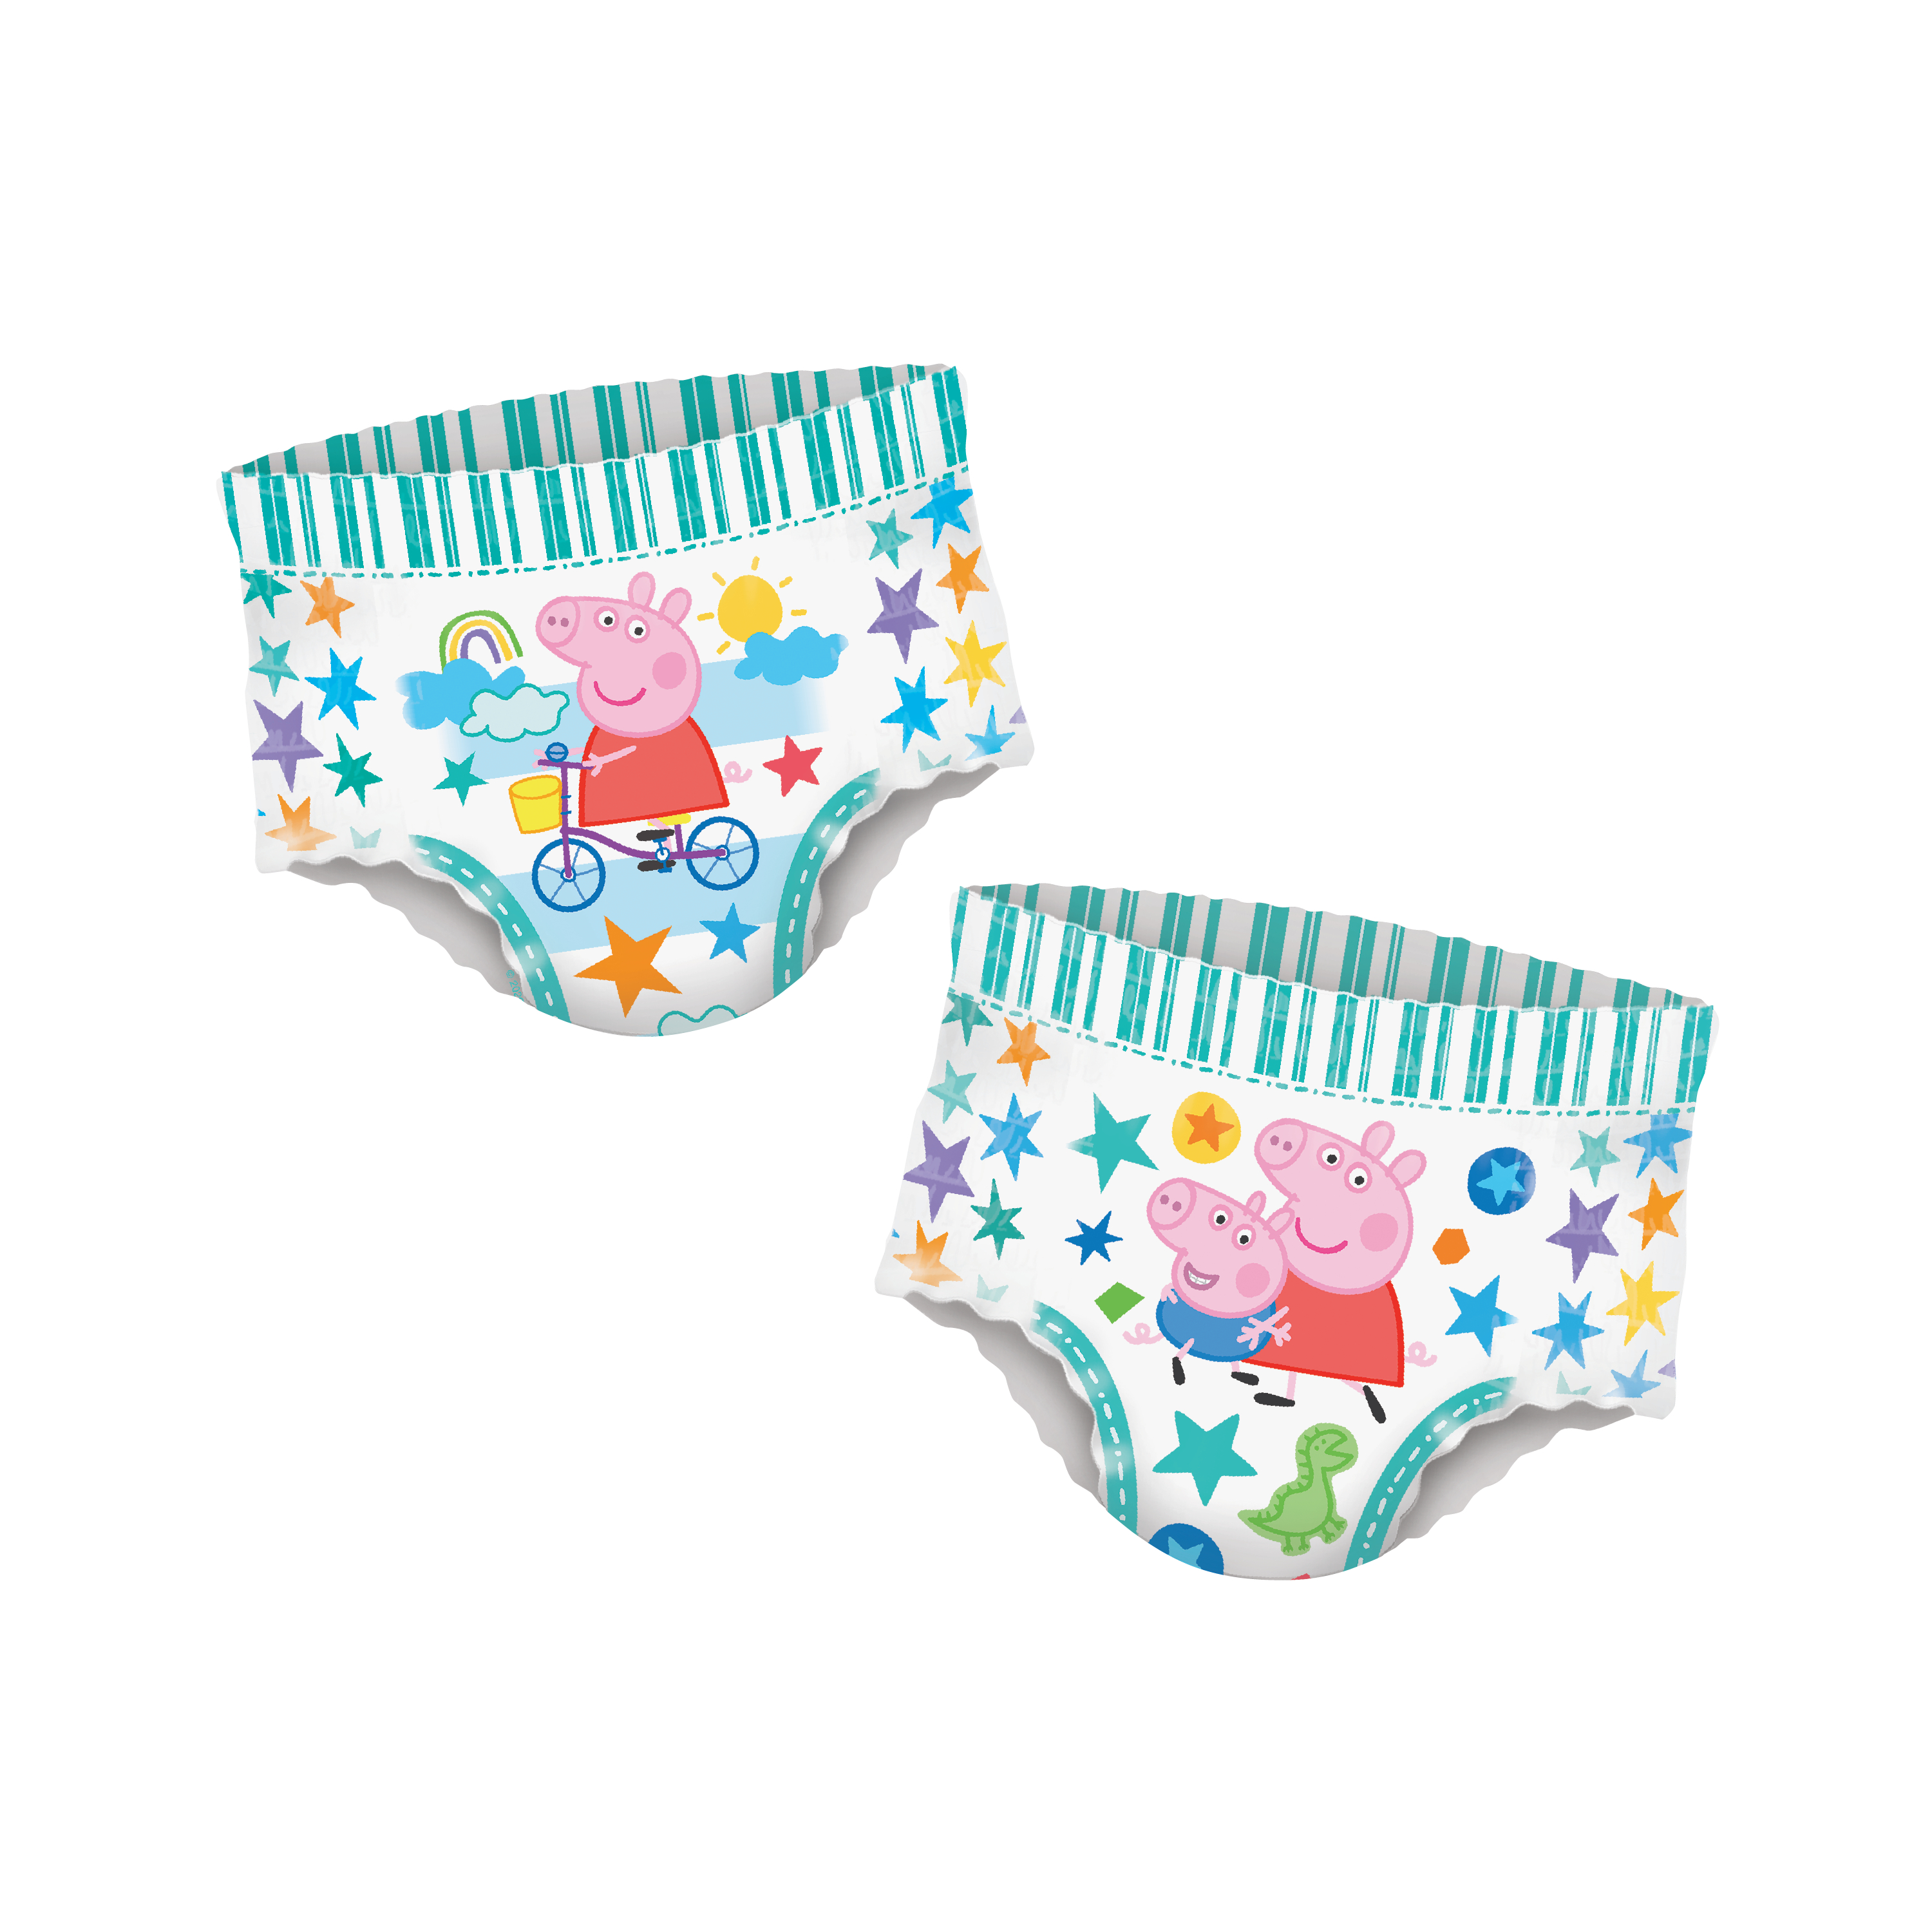 Oh Goody! Pampers Release New Peppa Pig Prints on Limited Edition